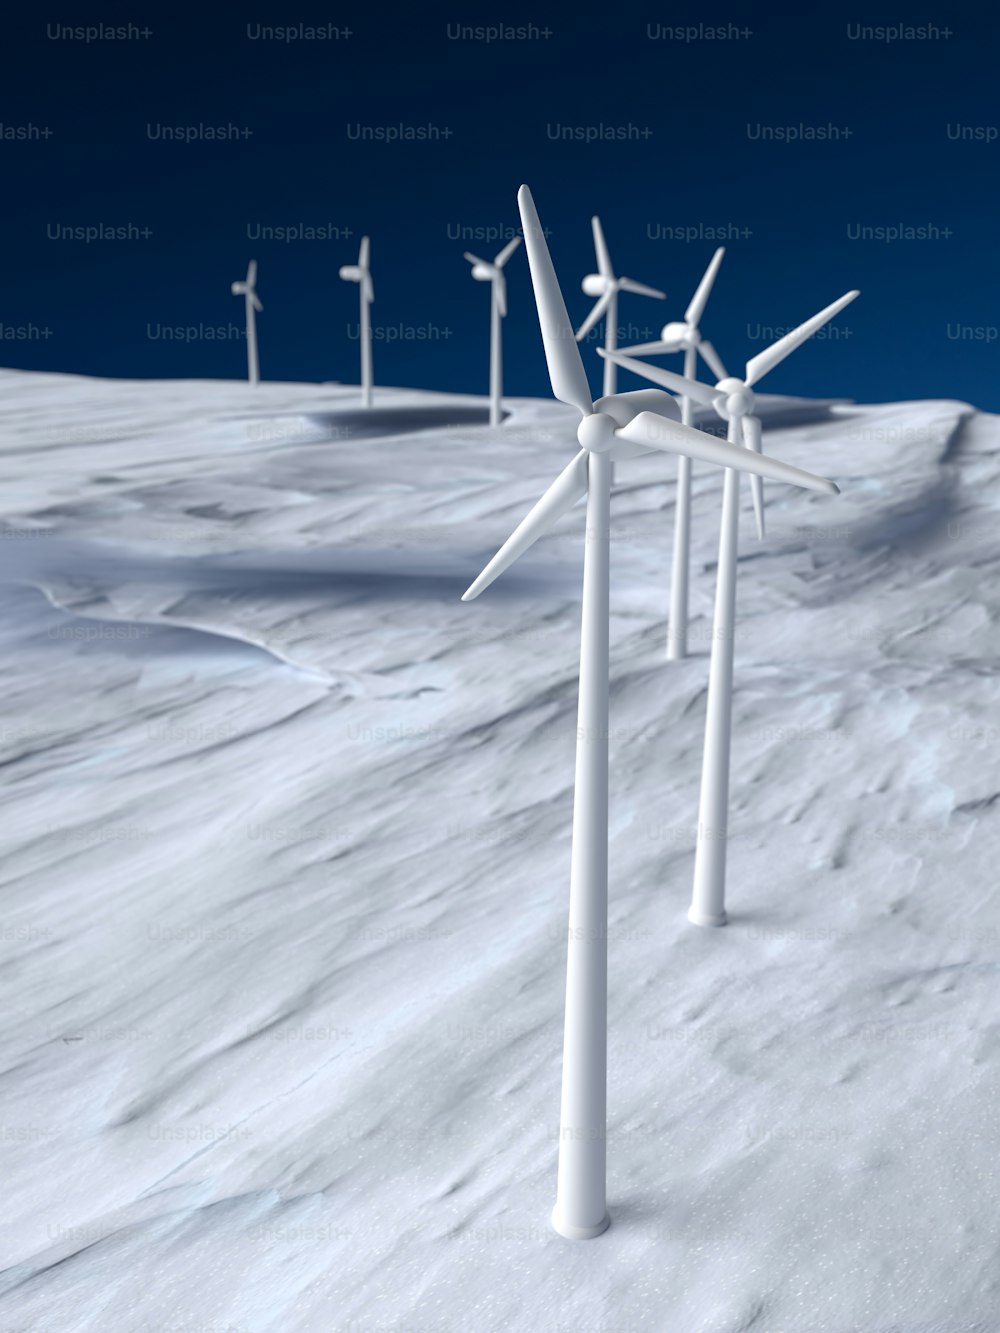 a group of wind turbines standing on top of a snow covered slope